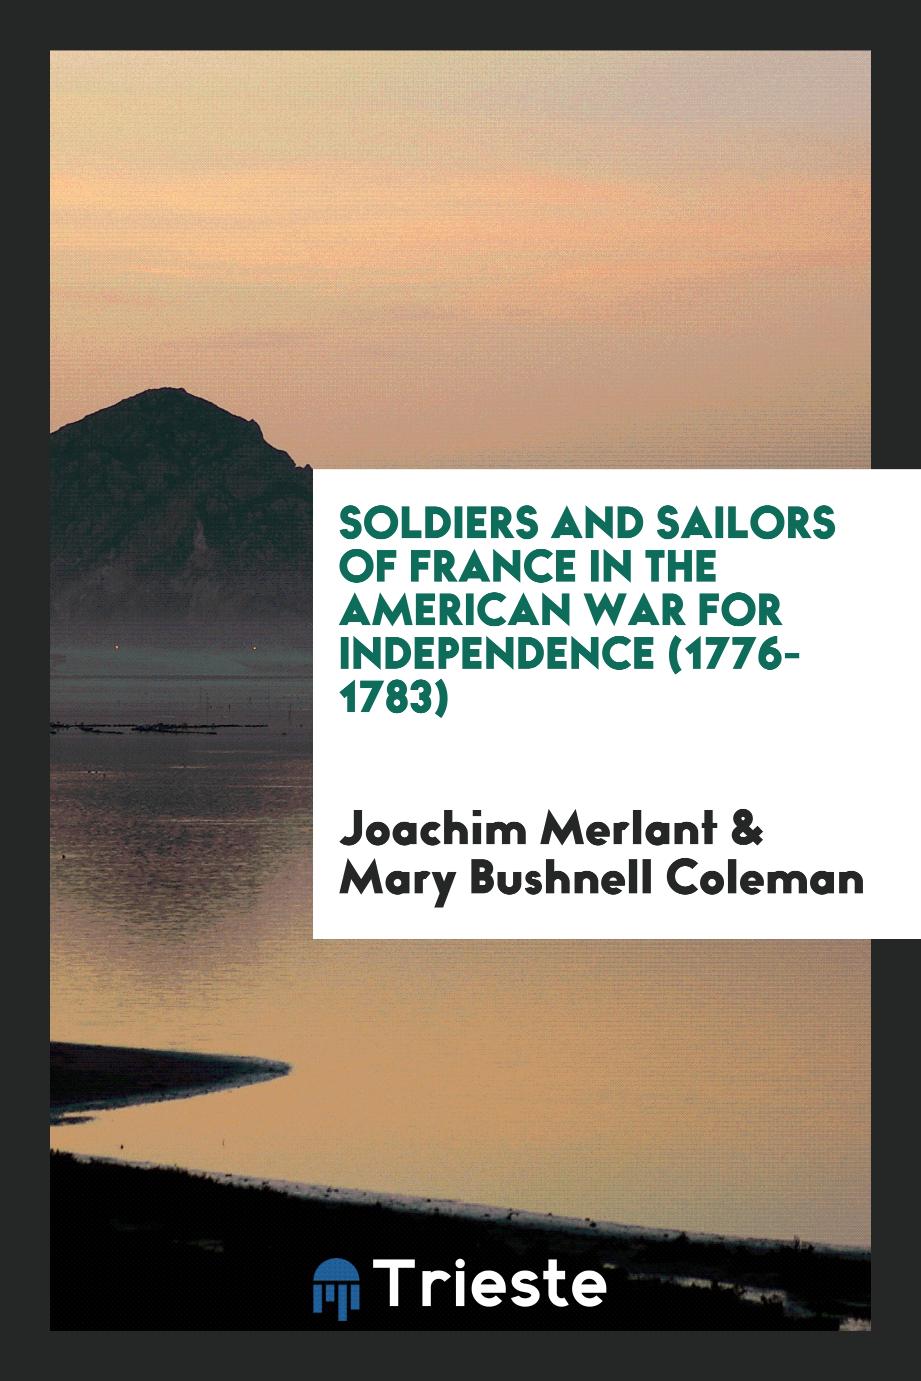 Soldiers and Sailors of France in the American War for Independence (1776-1783)